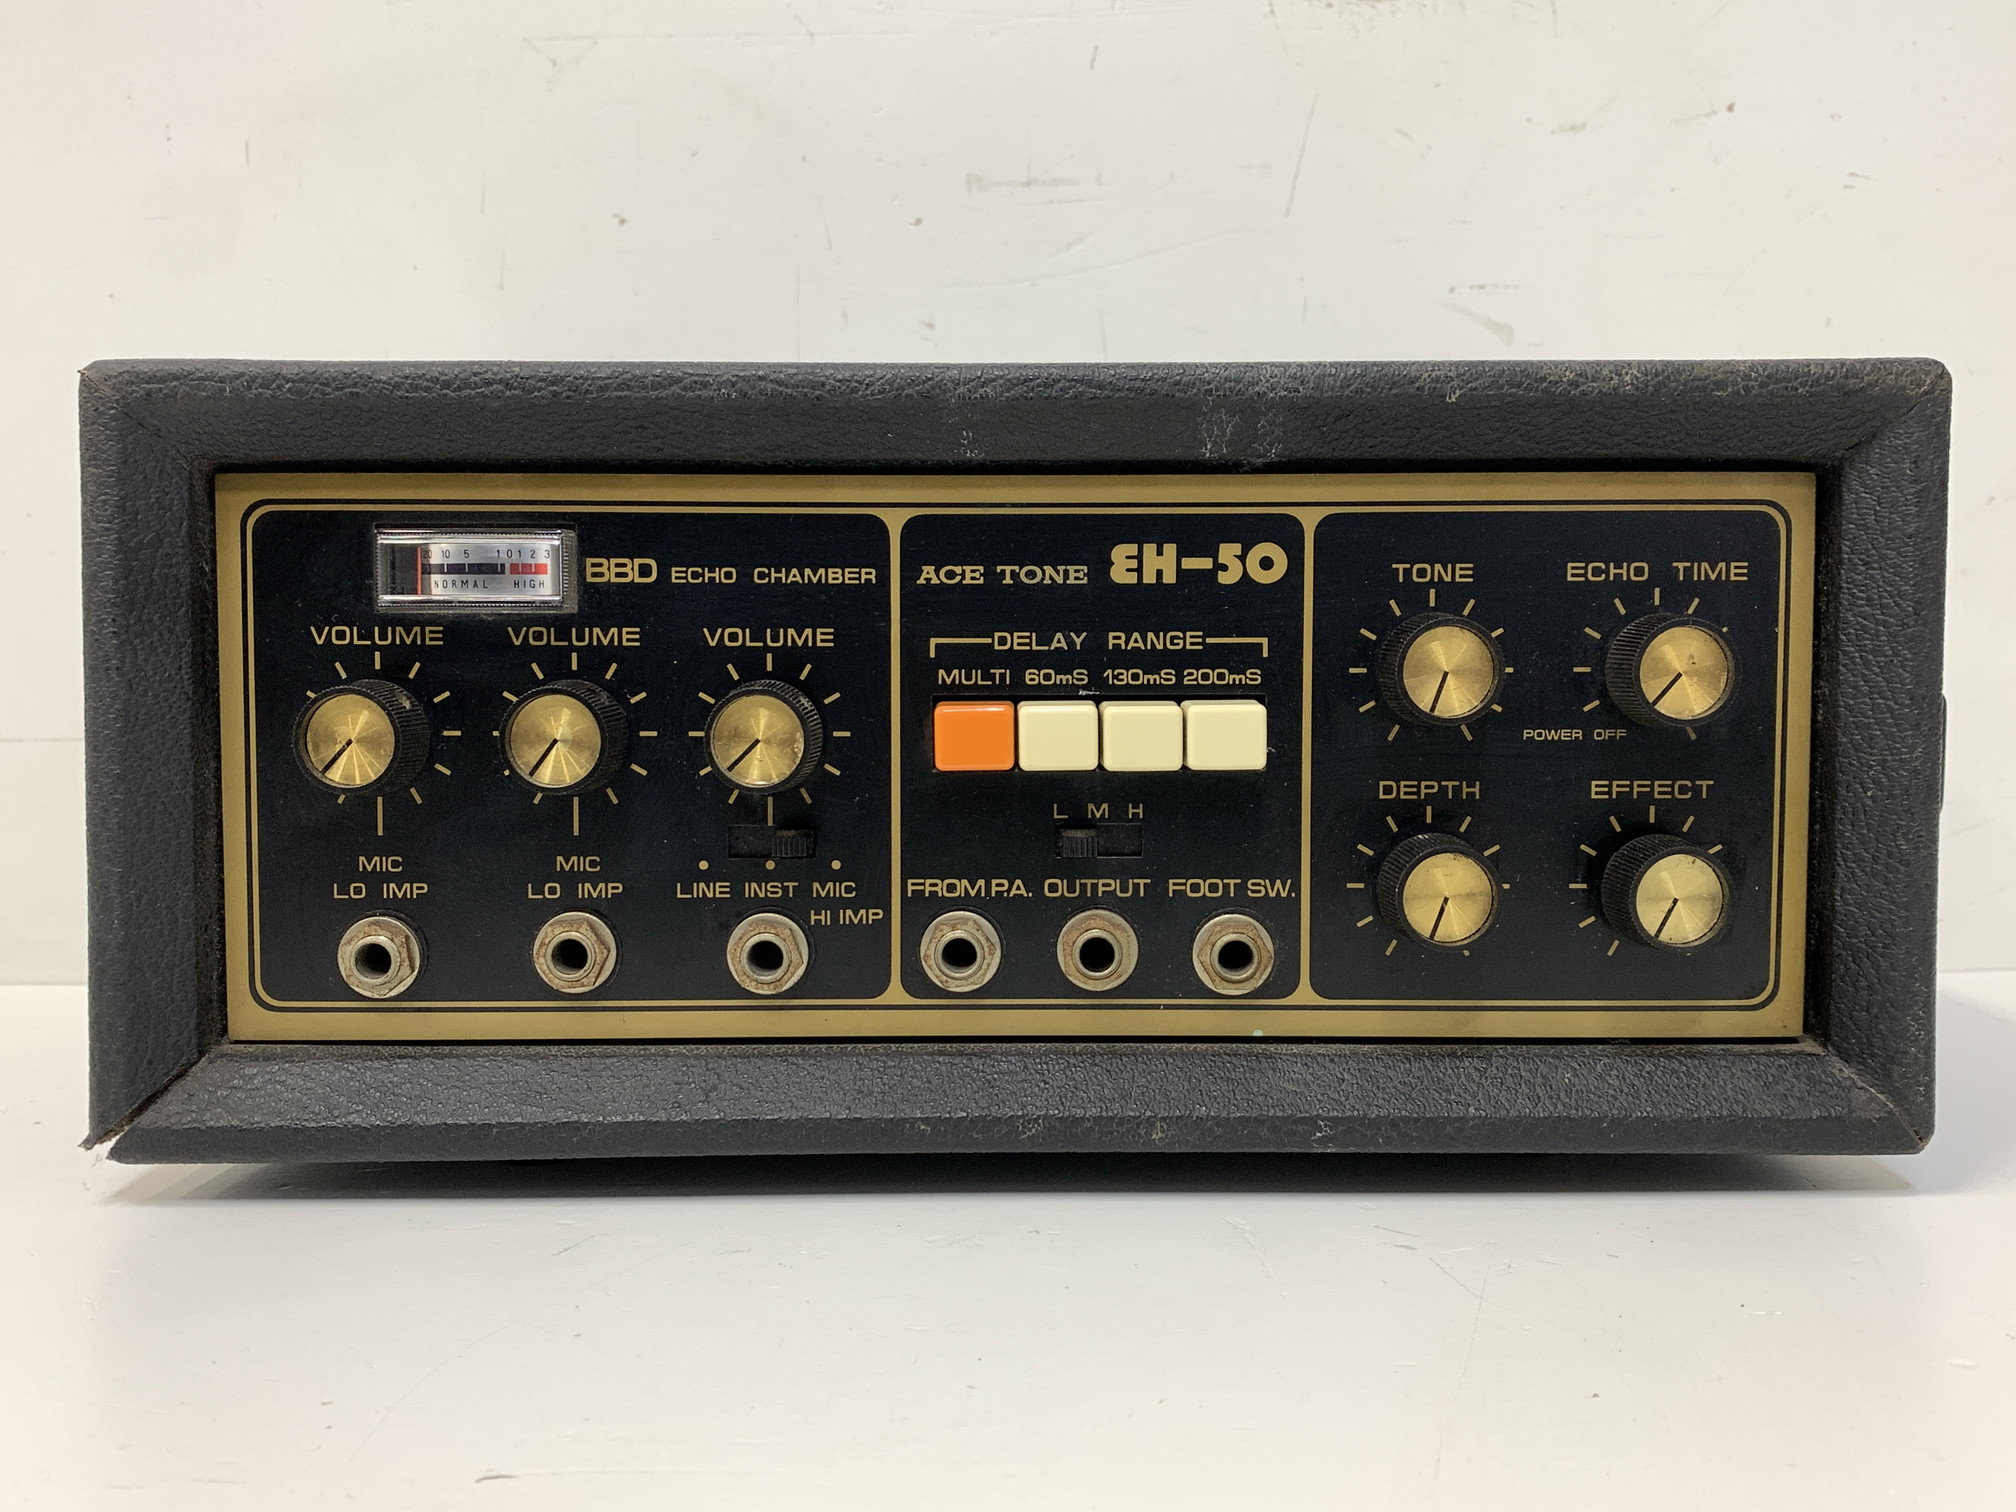 ACE TONE EH-50 BBD ECHO CHAMBER